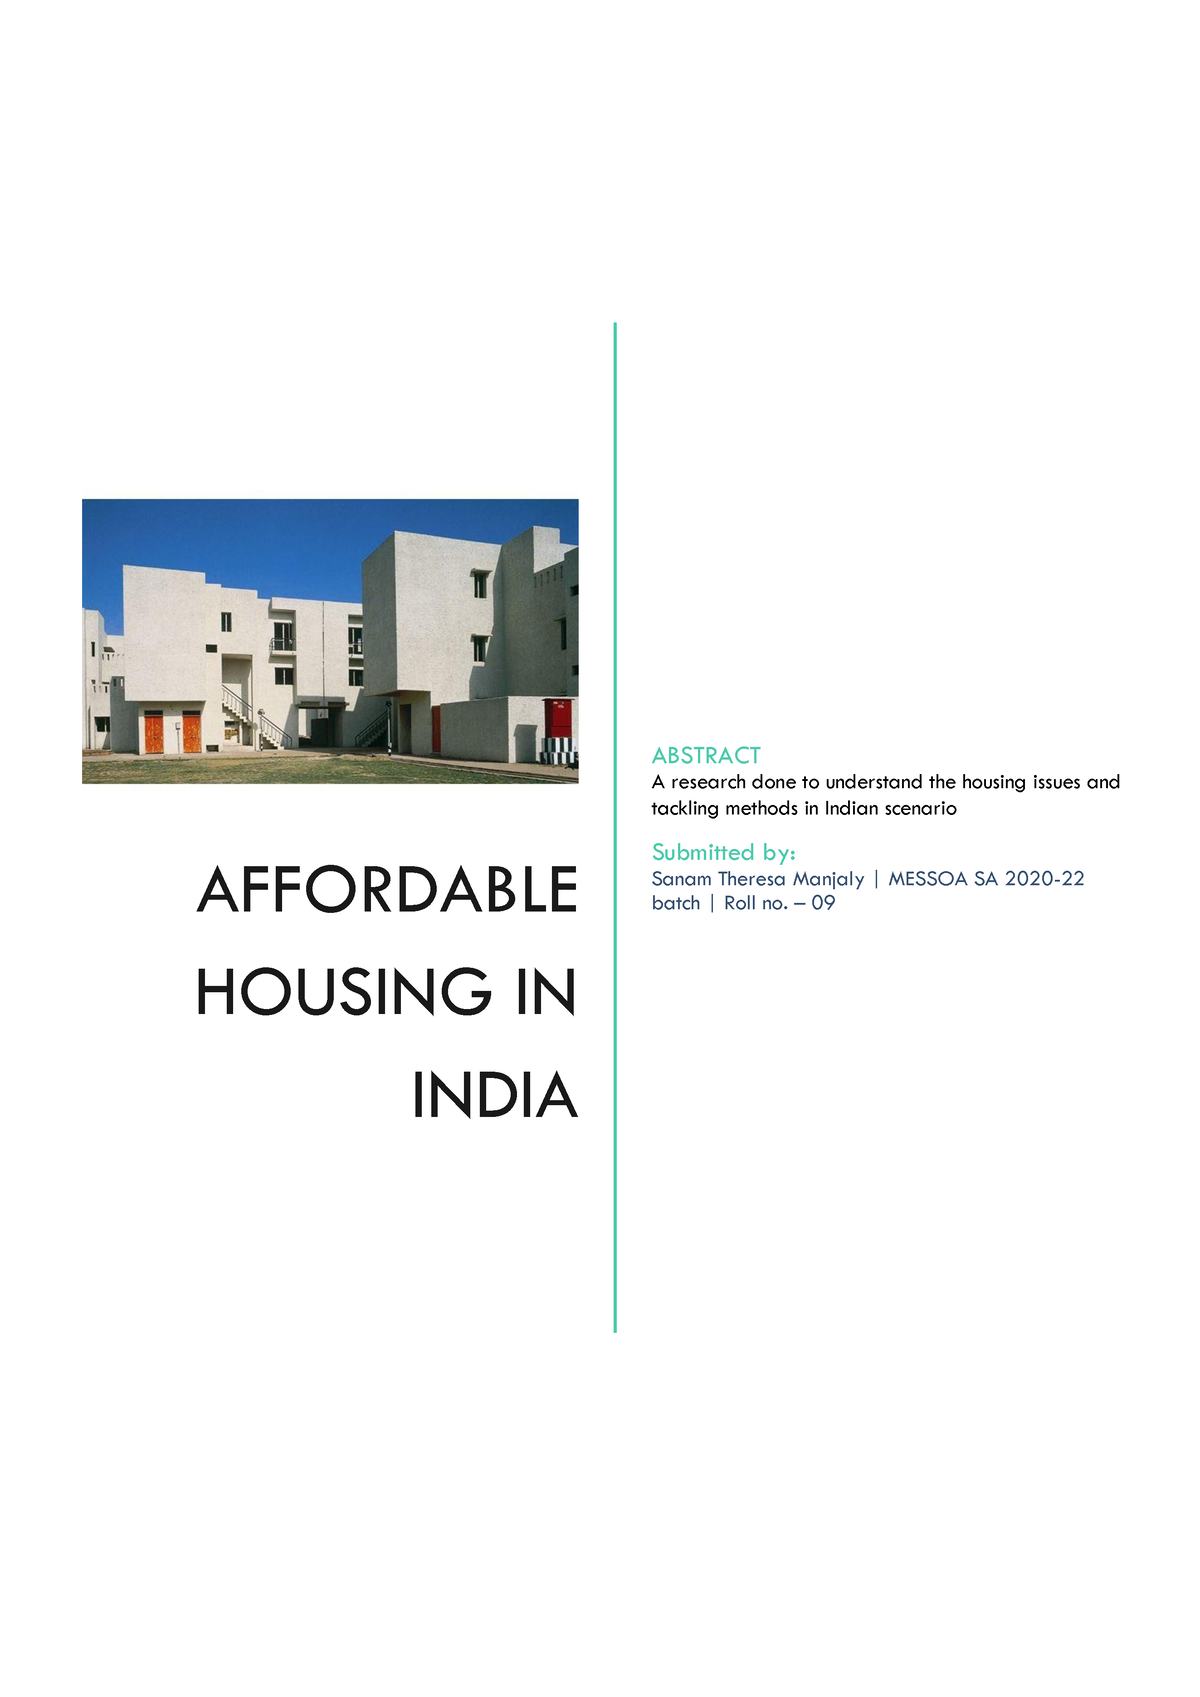 essay on affordable housing in india